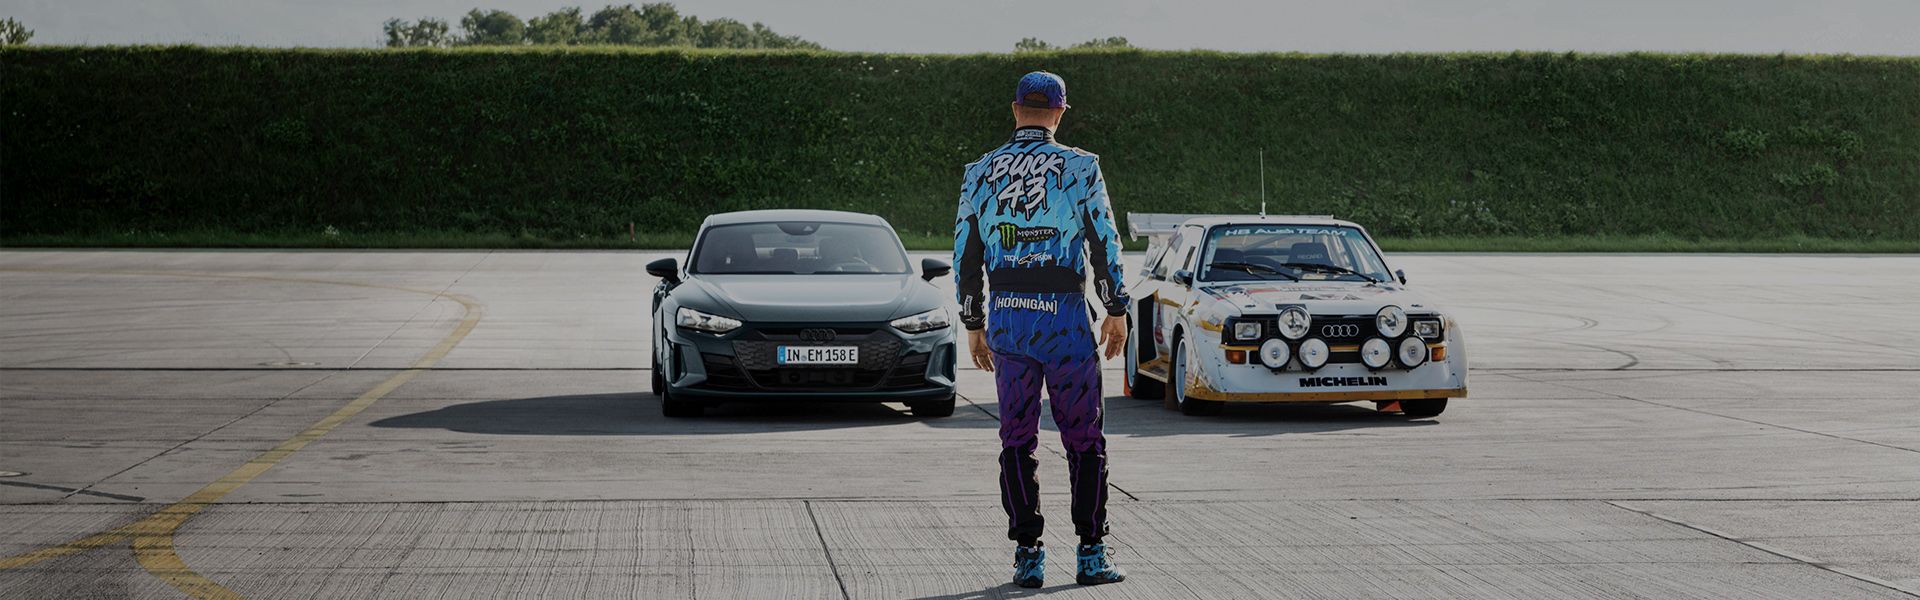 Ken Block stands with his back to the camera in front of two Audi models.